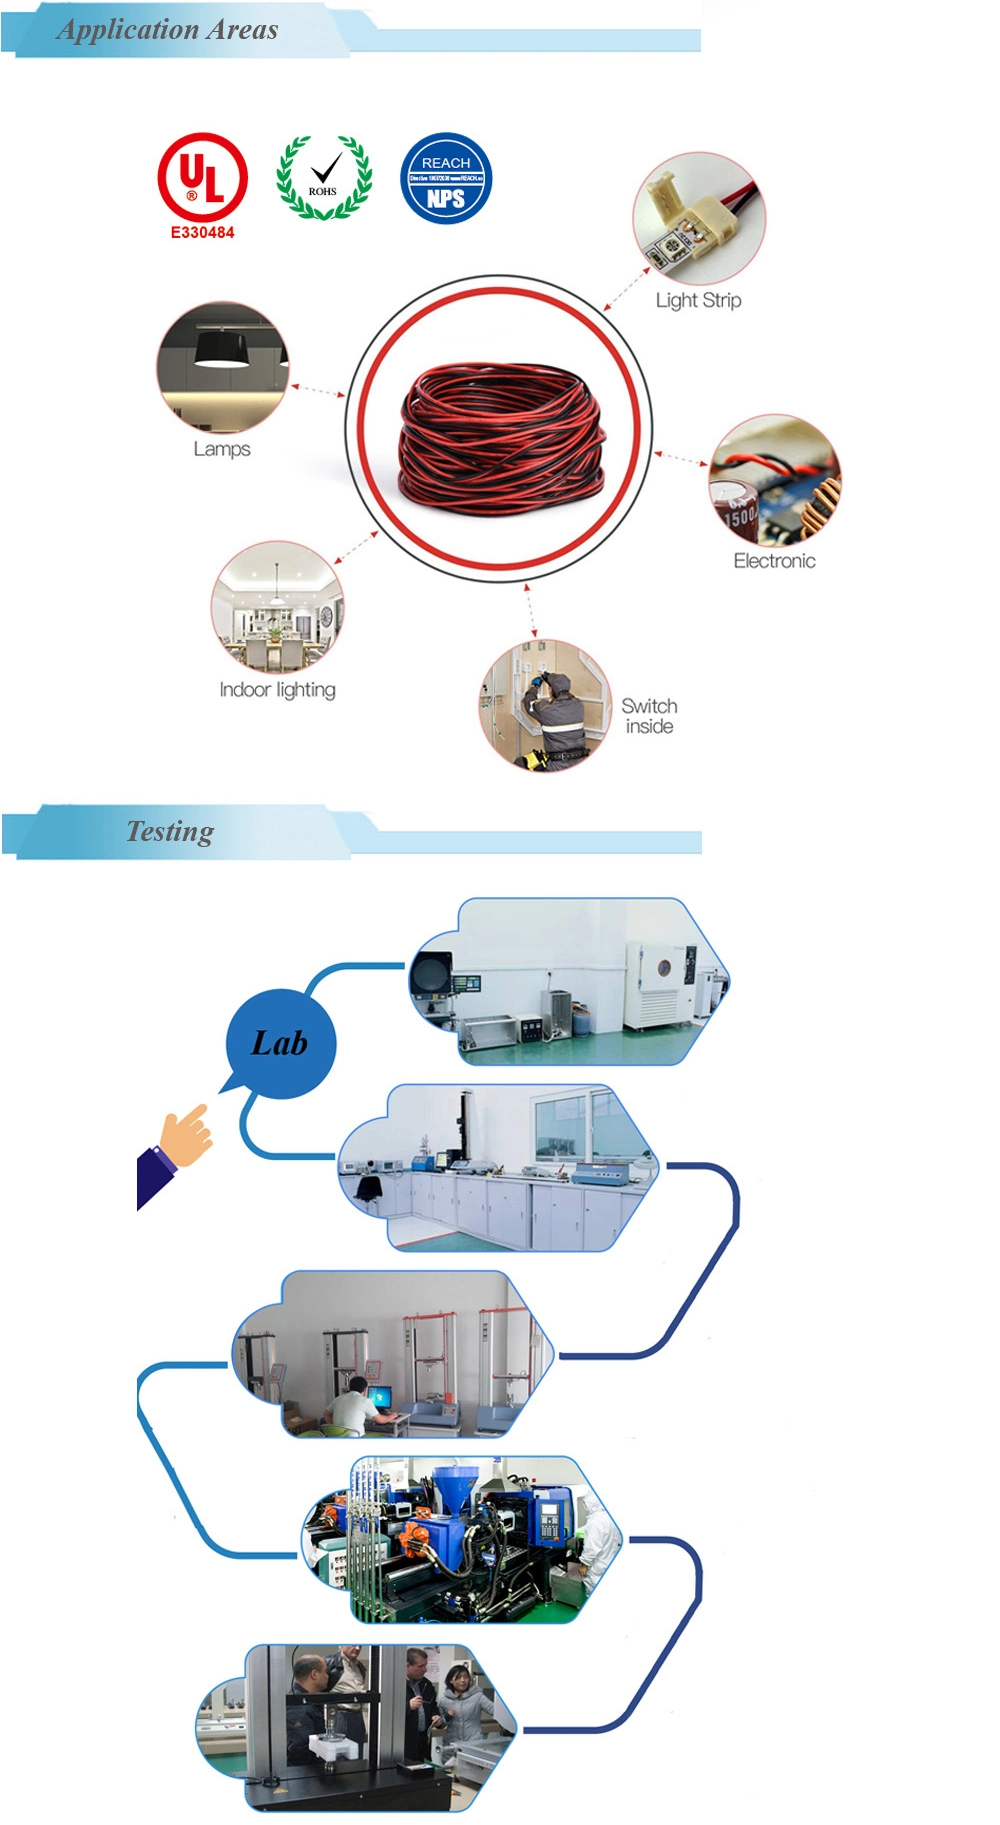 UL1330 High Temperature Tin Plated Copper Wire Cable